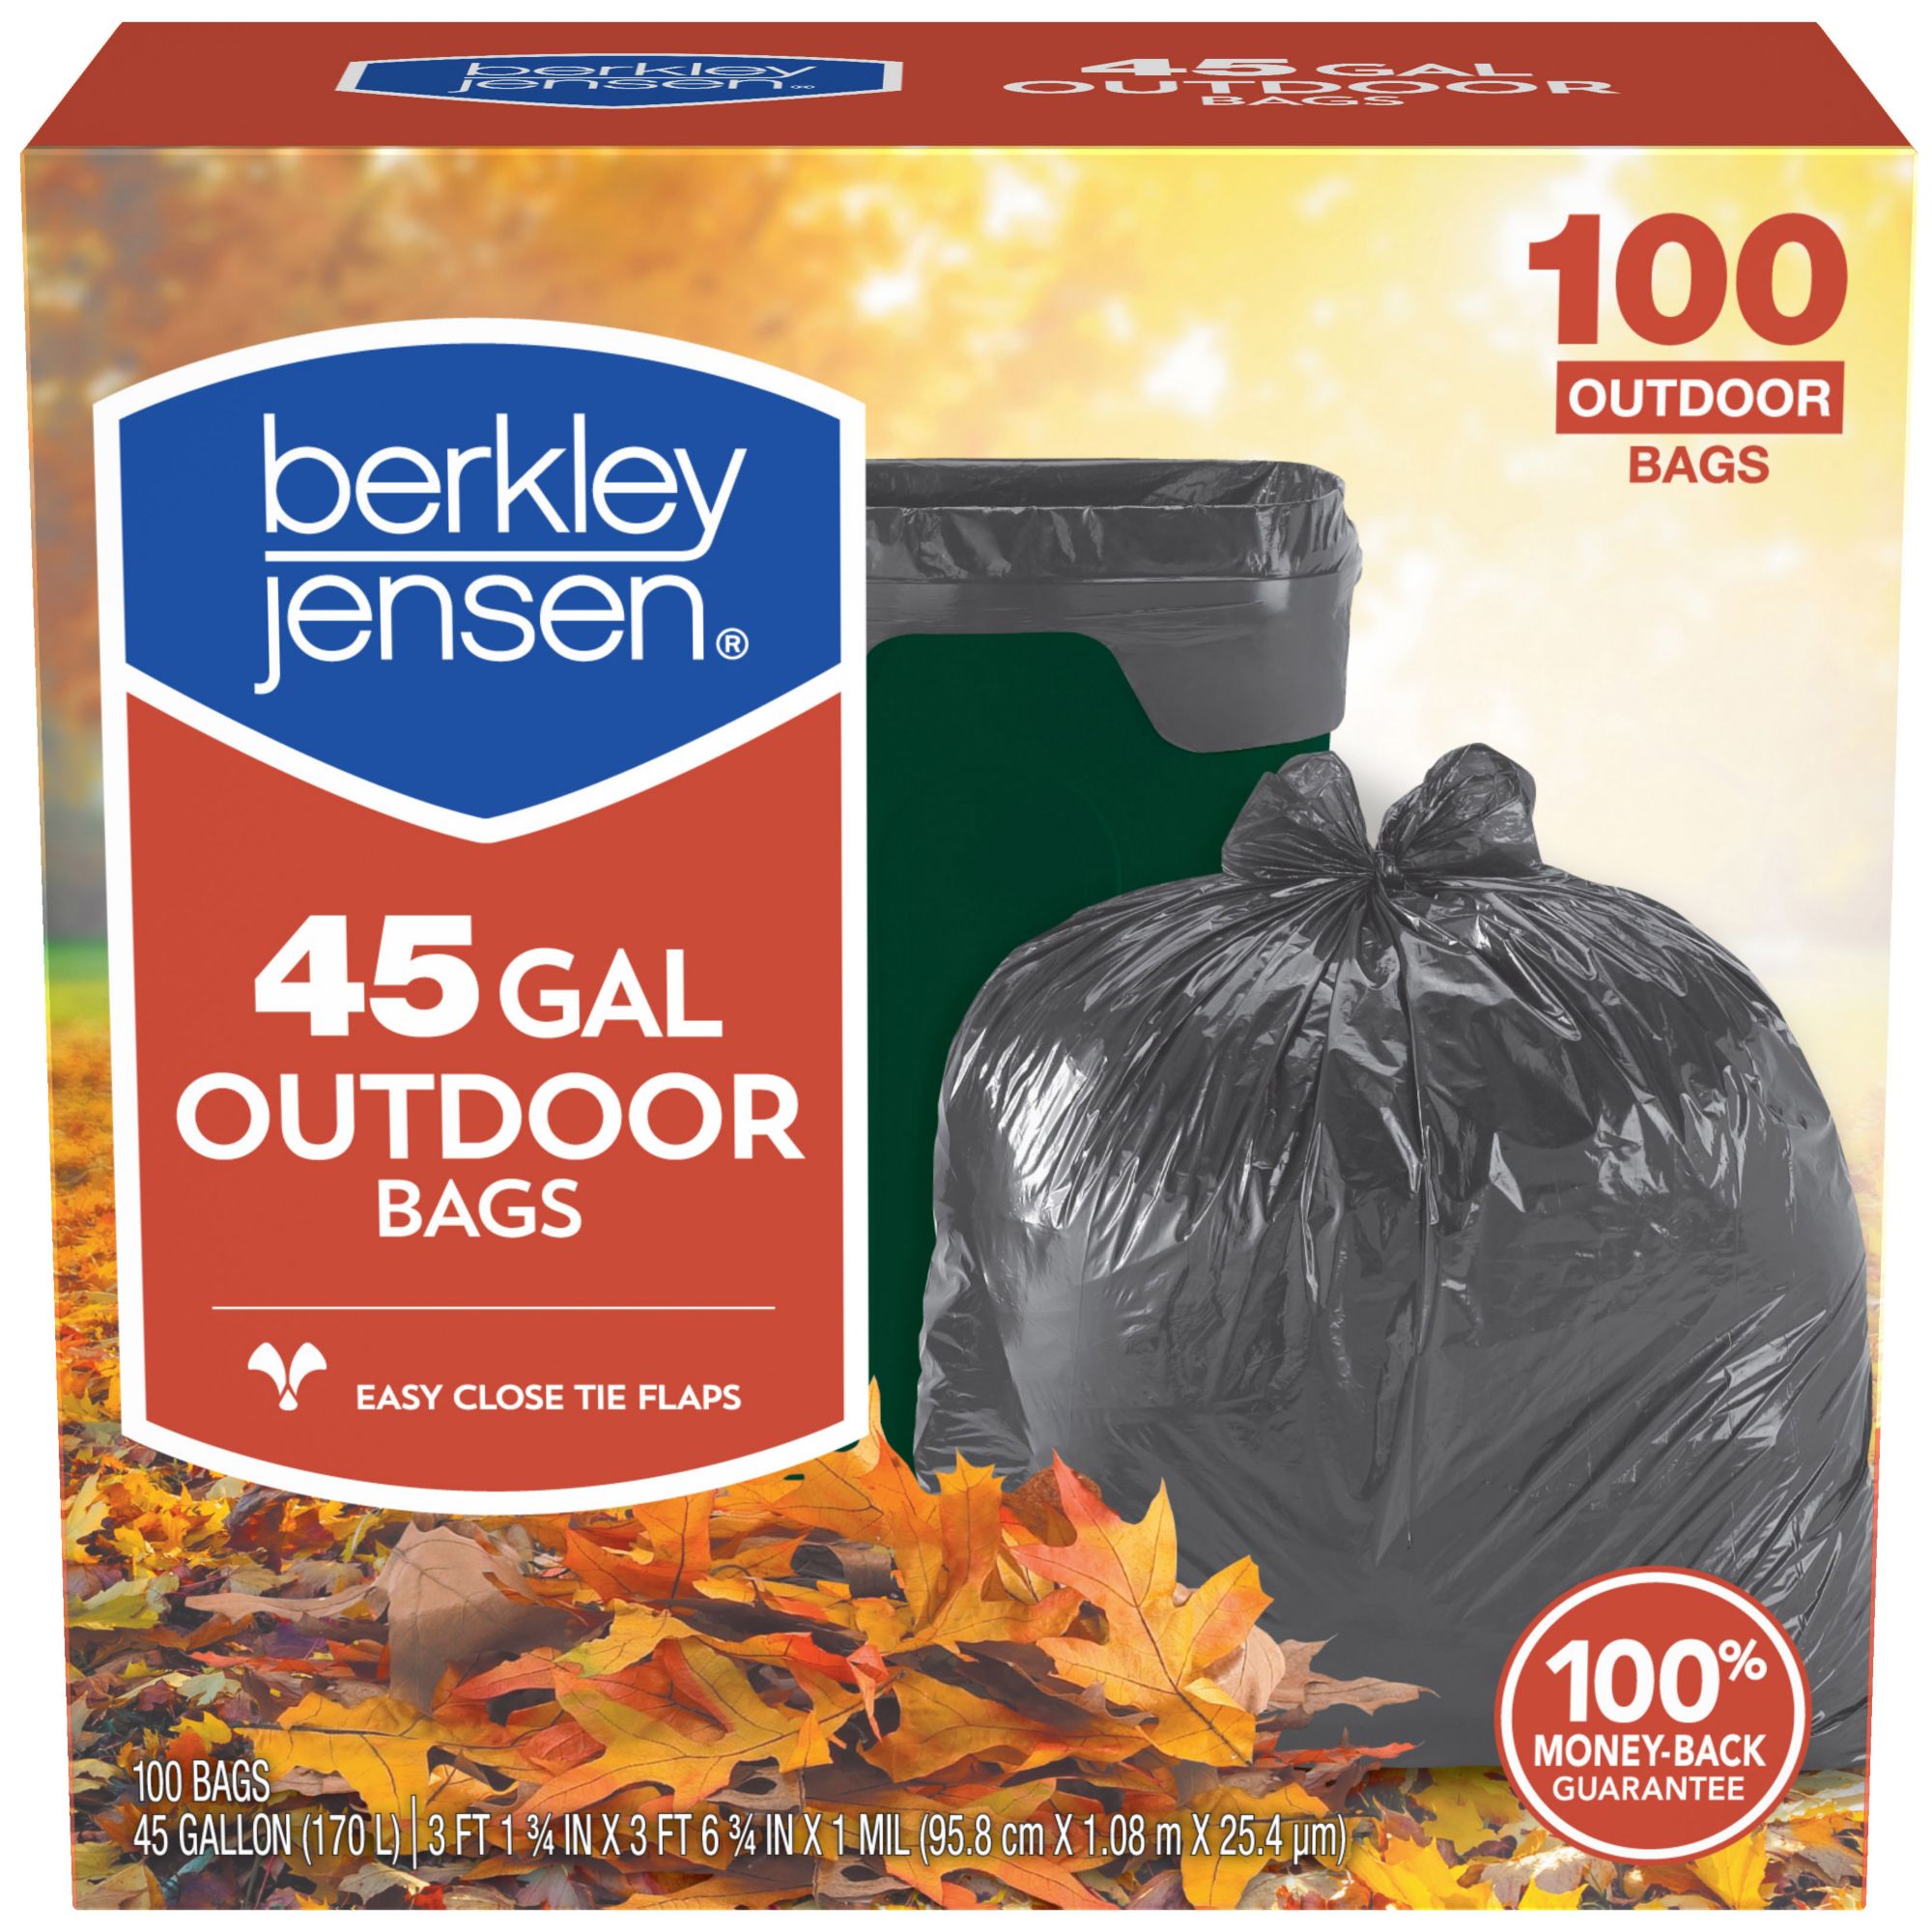 100-Gallons Black Outdoor Plastic Lawn and Leaf Trash Bag (50-Count)